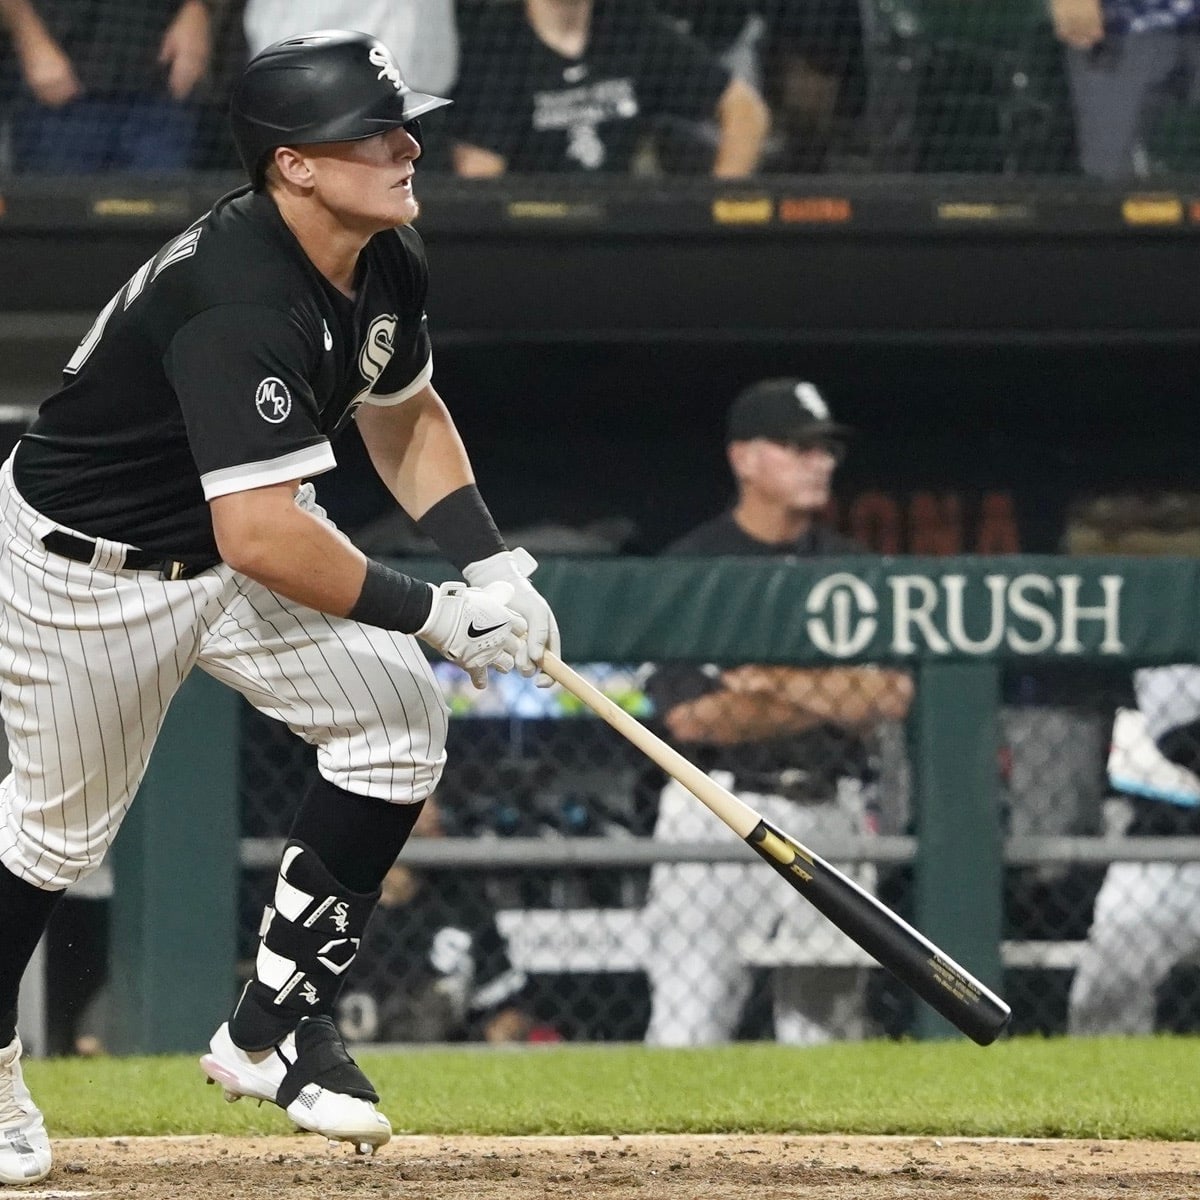 Cal Baseball: Andrew Vaughn and the White Sox Fueled by Visions of